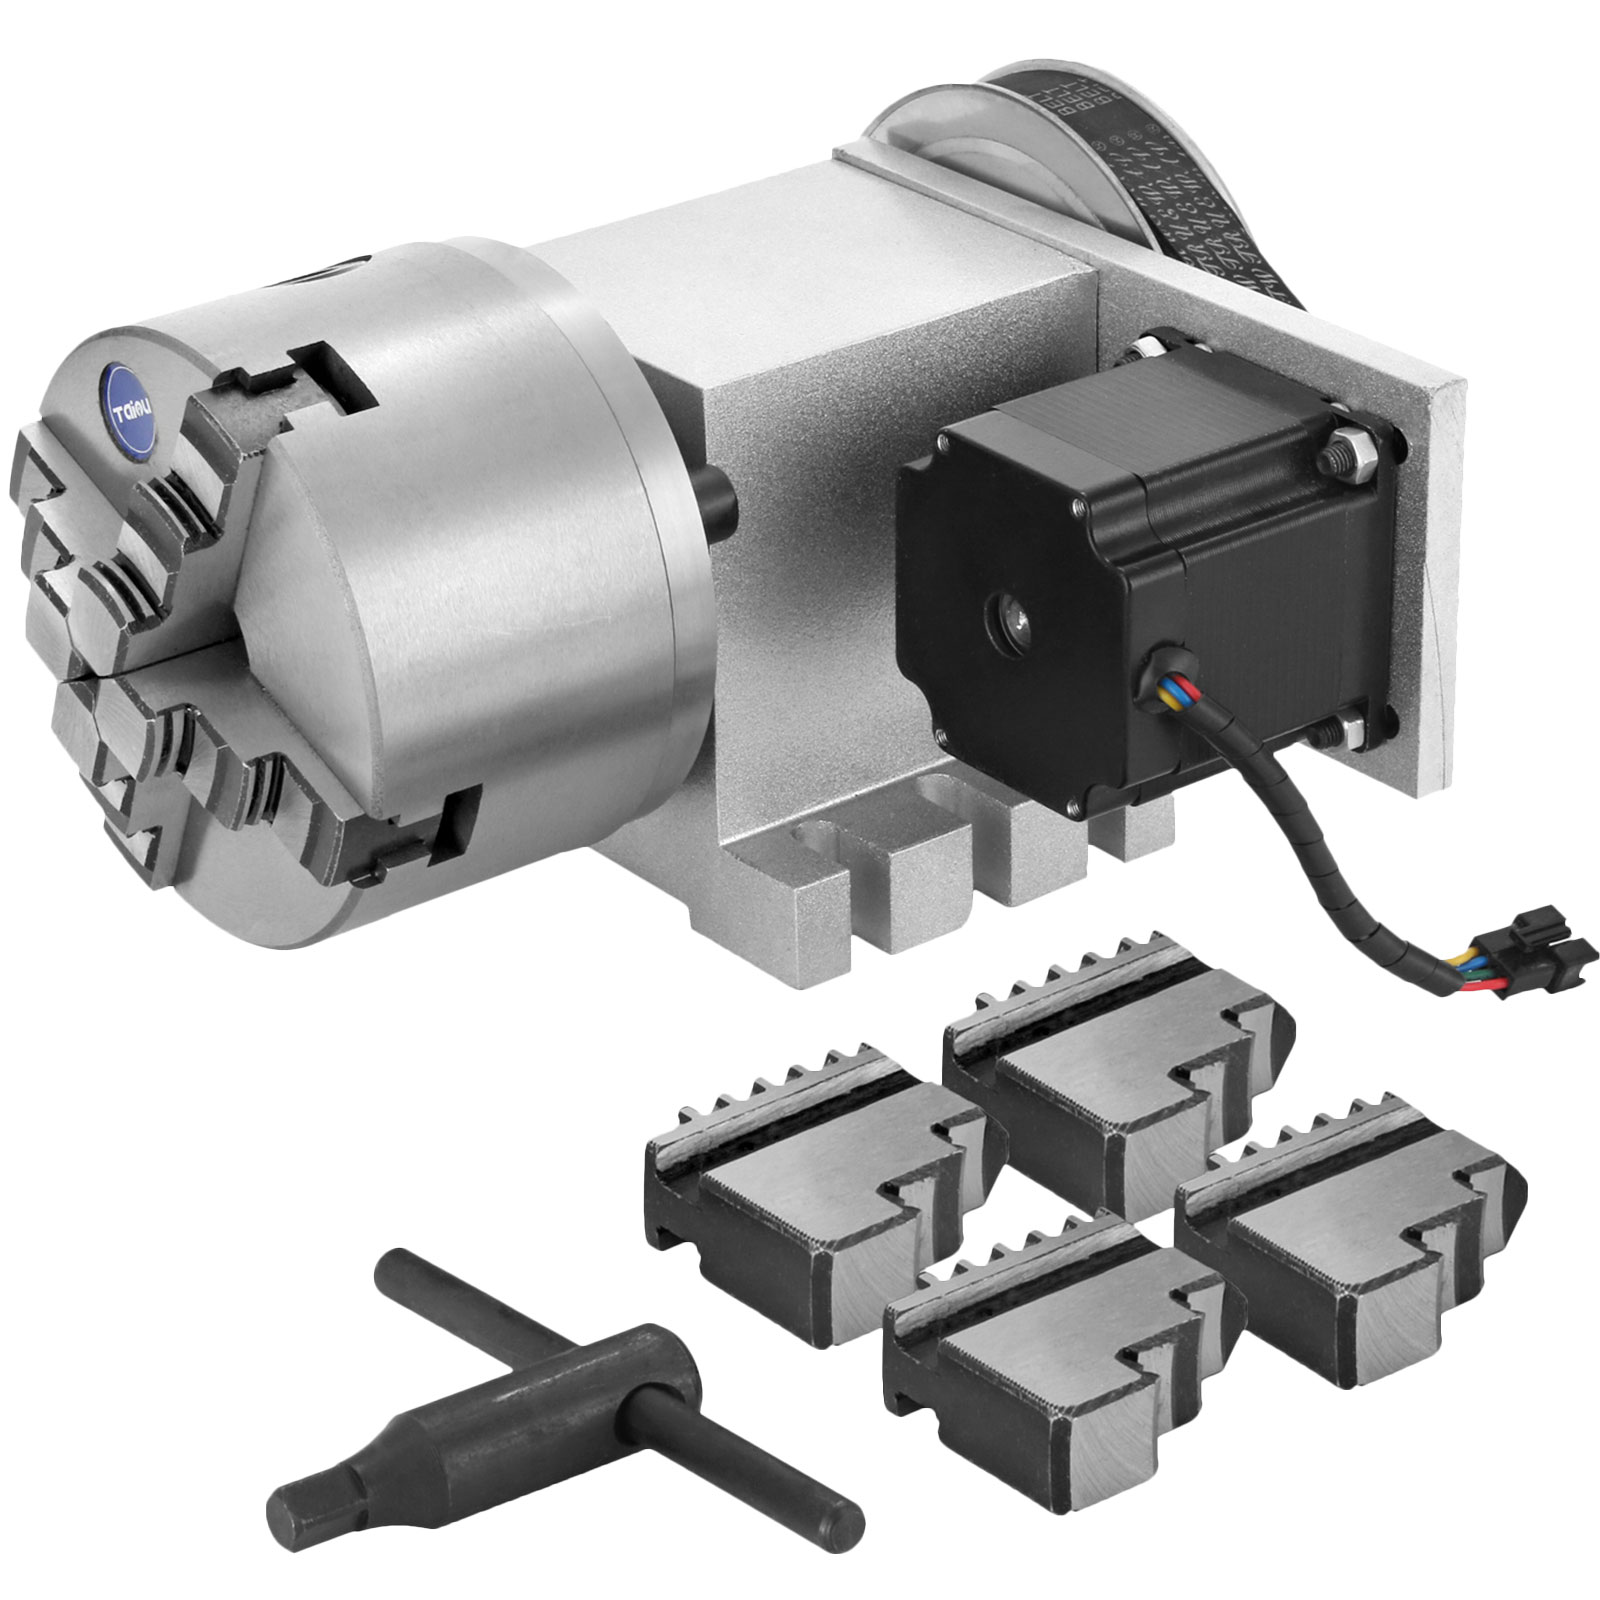 CNC Router Rotational Rotary Axis 4-Jaw 4th-axis Self-centering High Performance 